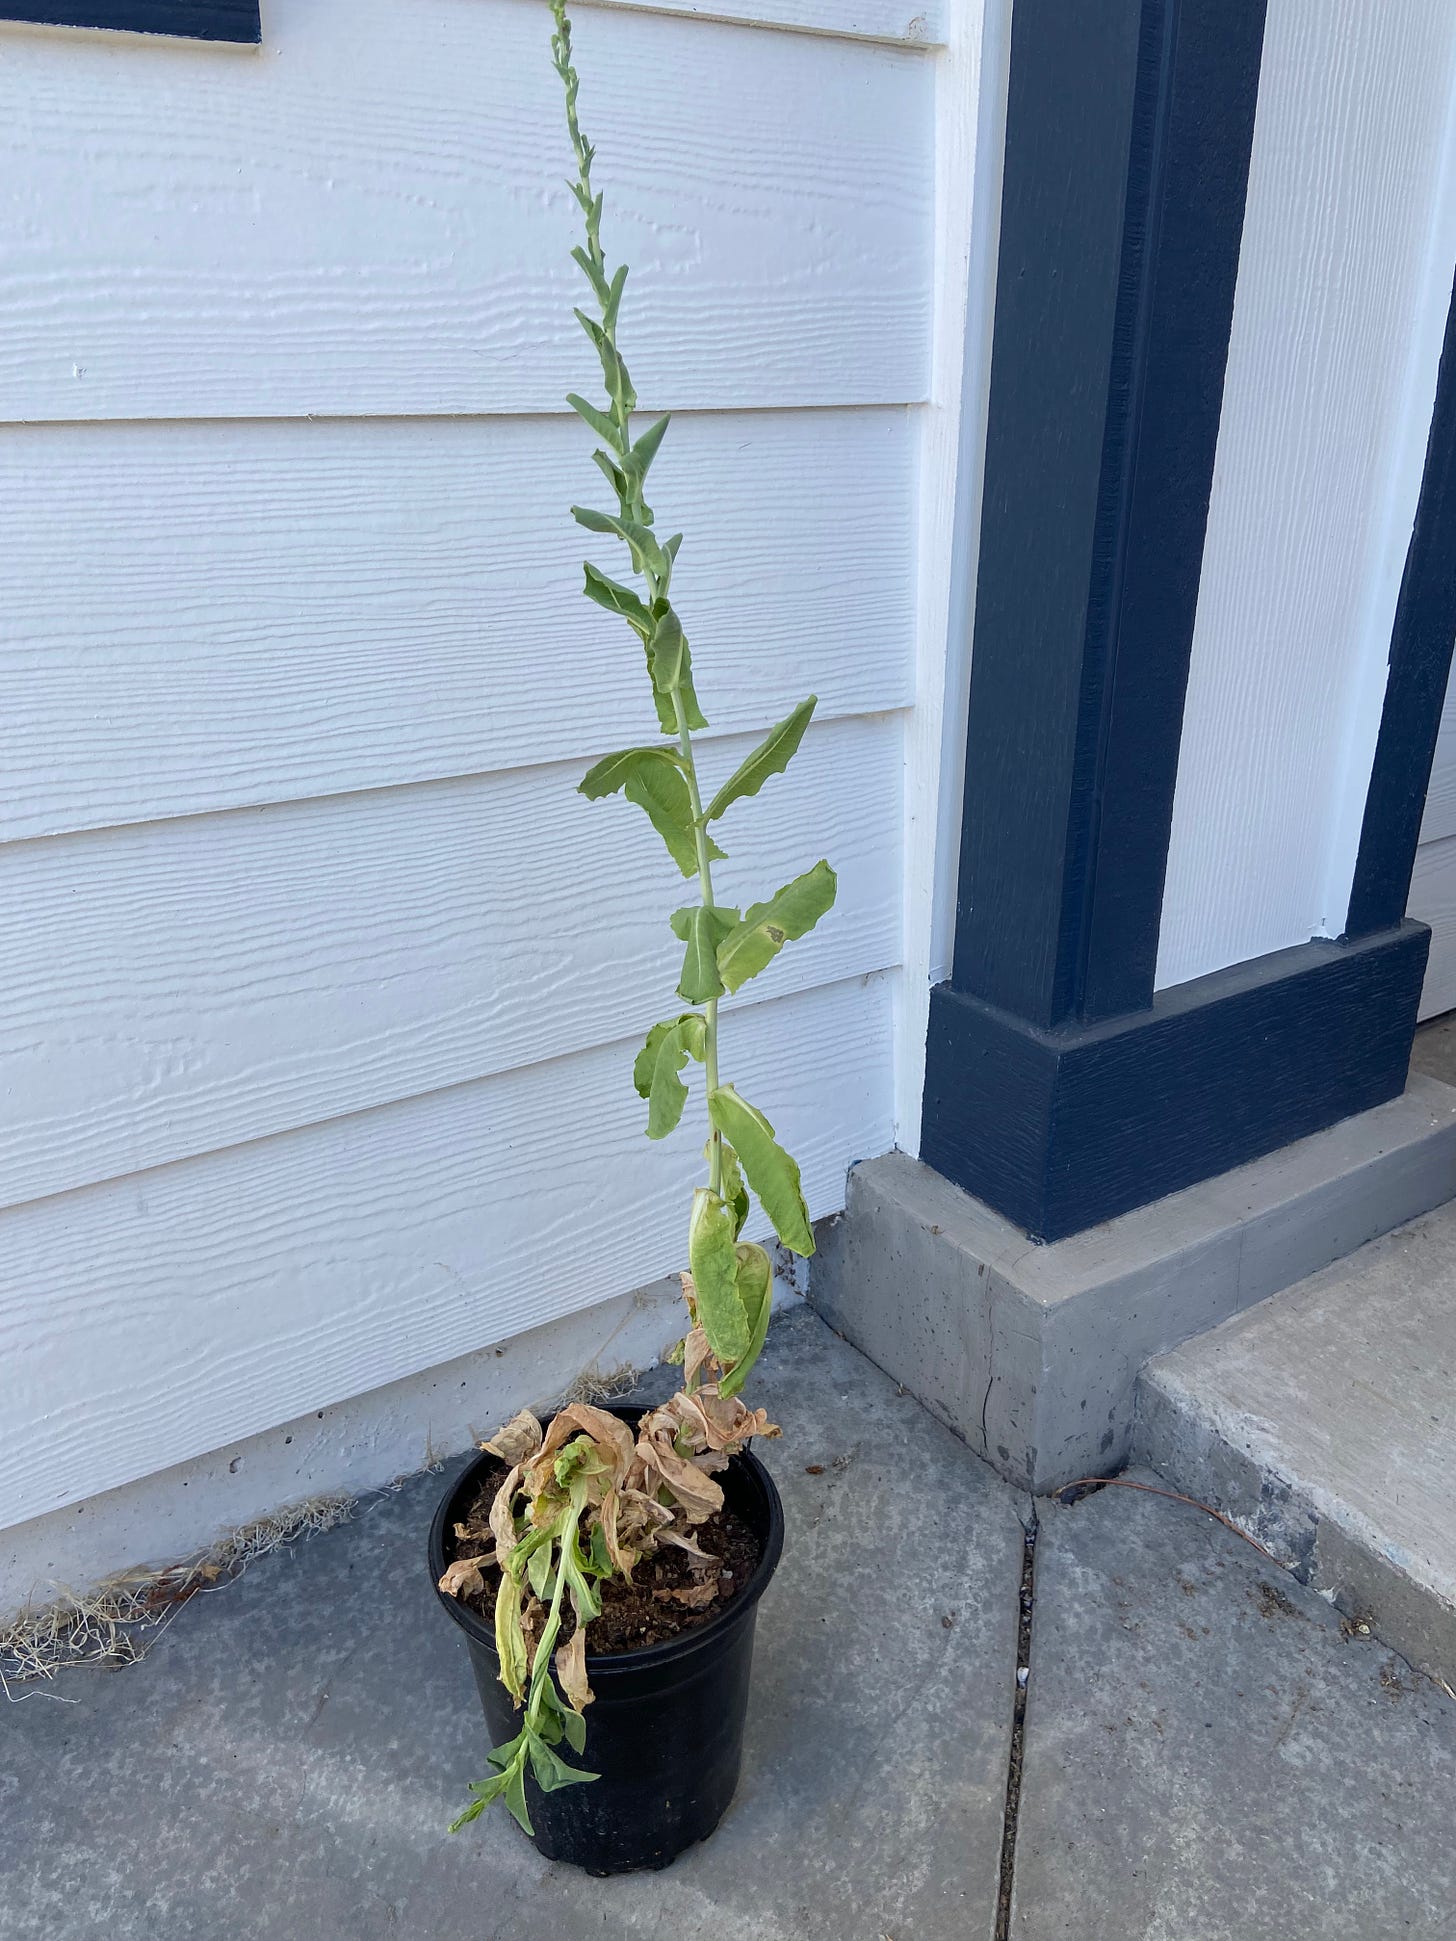 photo of a single lettuce plant with a shriveled base of brown leaves and a single, spindly stalk that is nearly two feet tall, with few wilted leaves along the stem. The plant is in a black plastic pot, sitting on the cement, in front of a white wall with blue trim. 